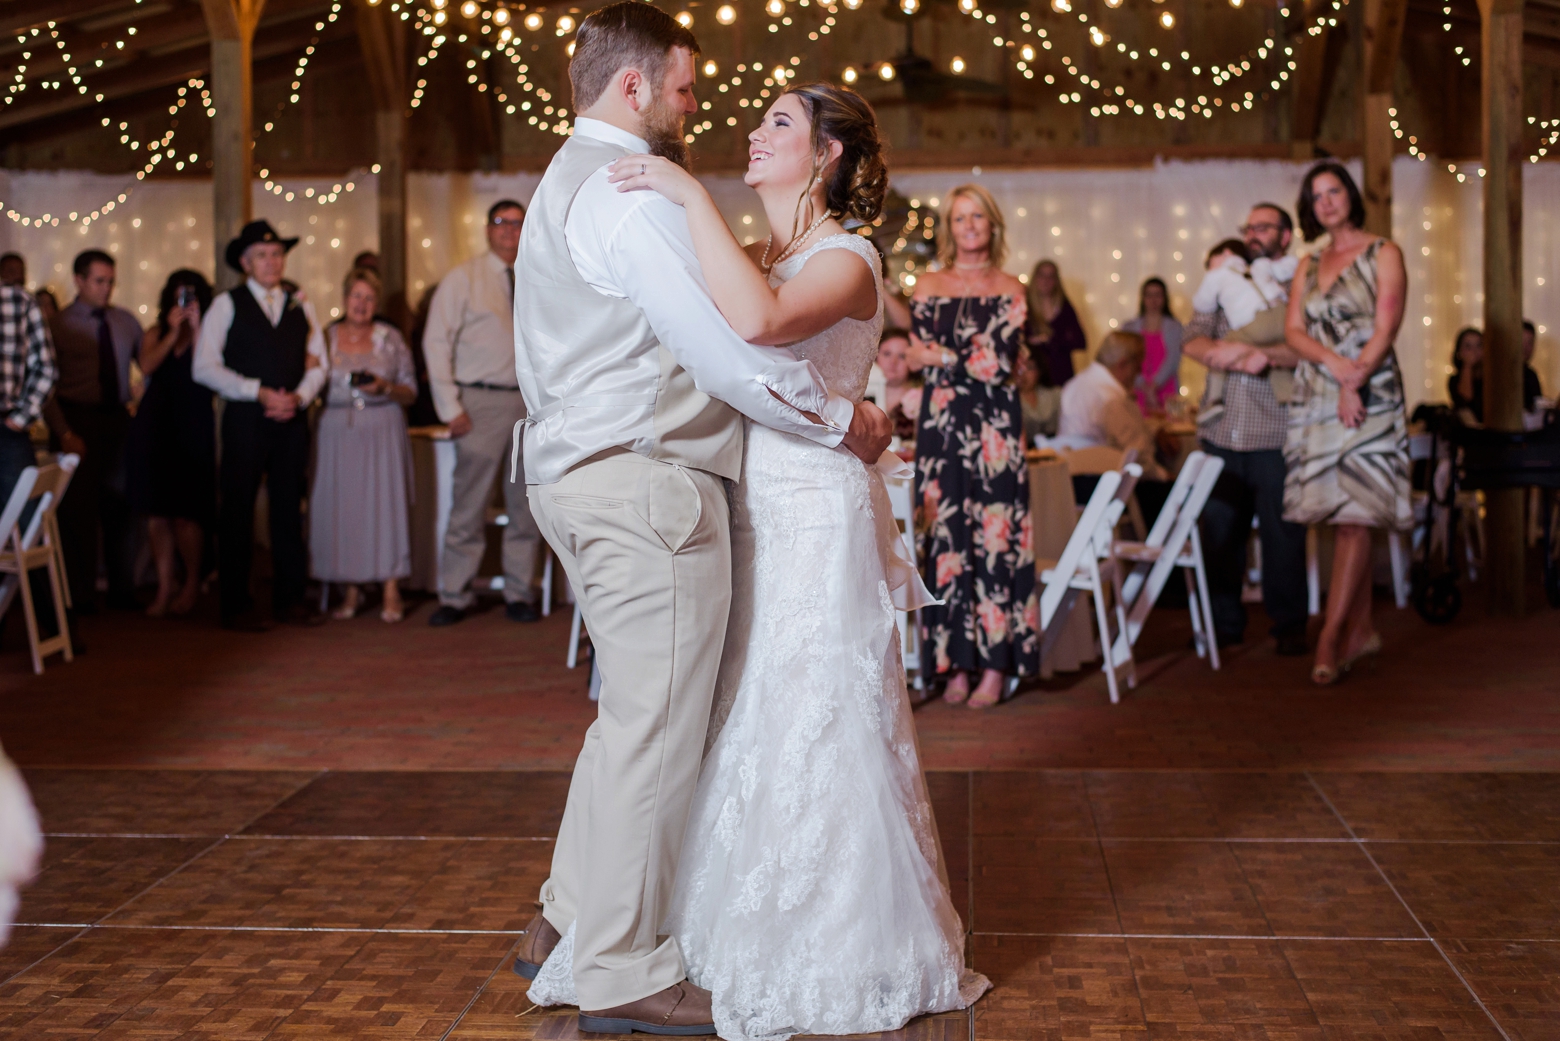 Bride and Groom dance together for the first time as man and wife